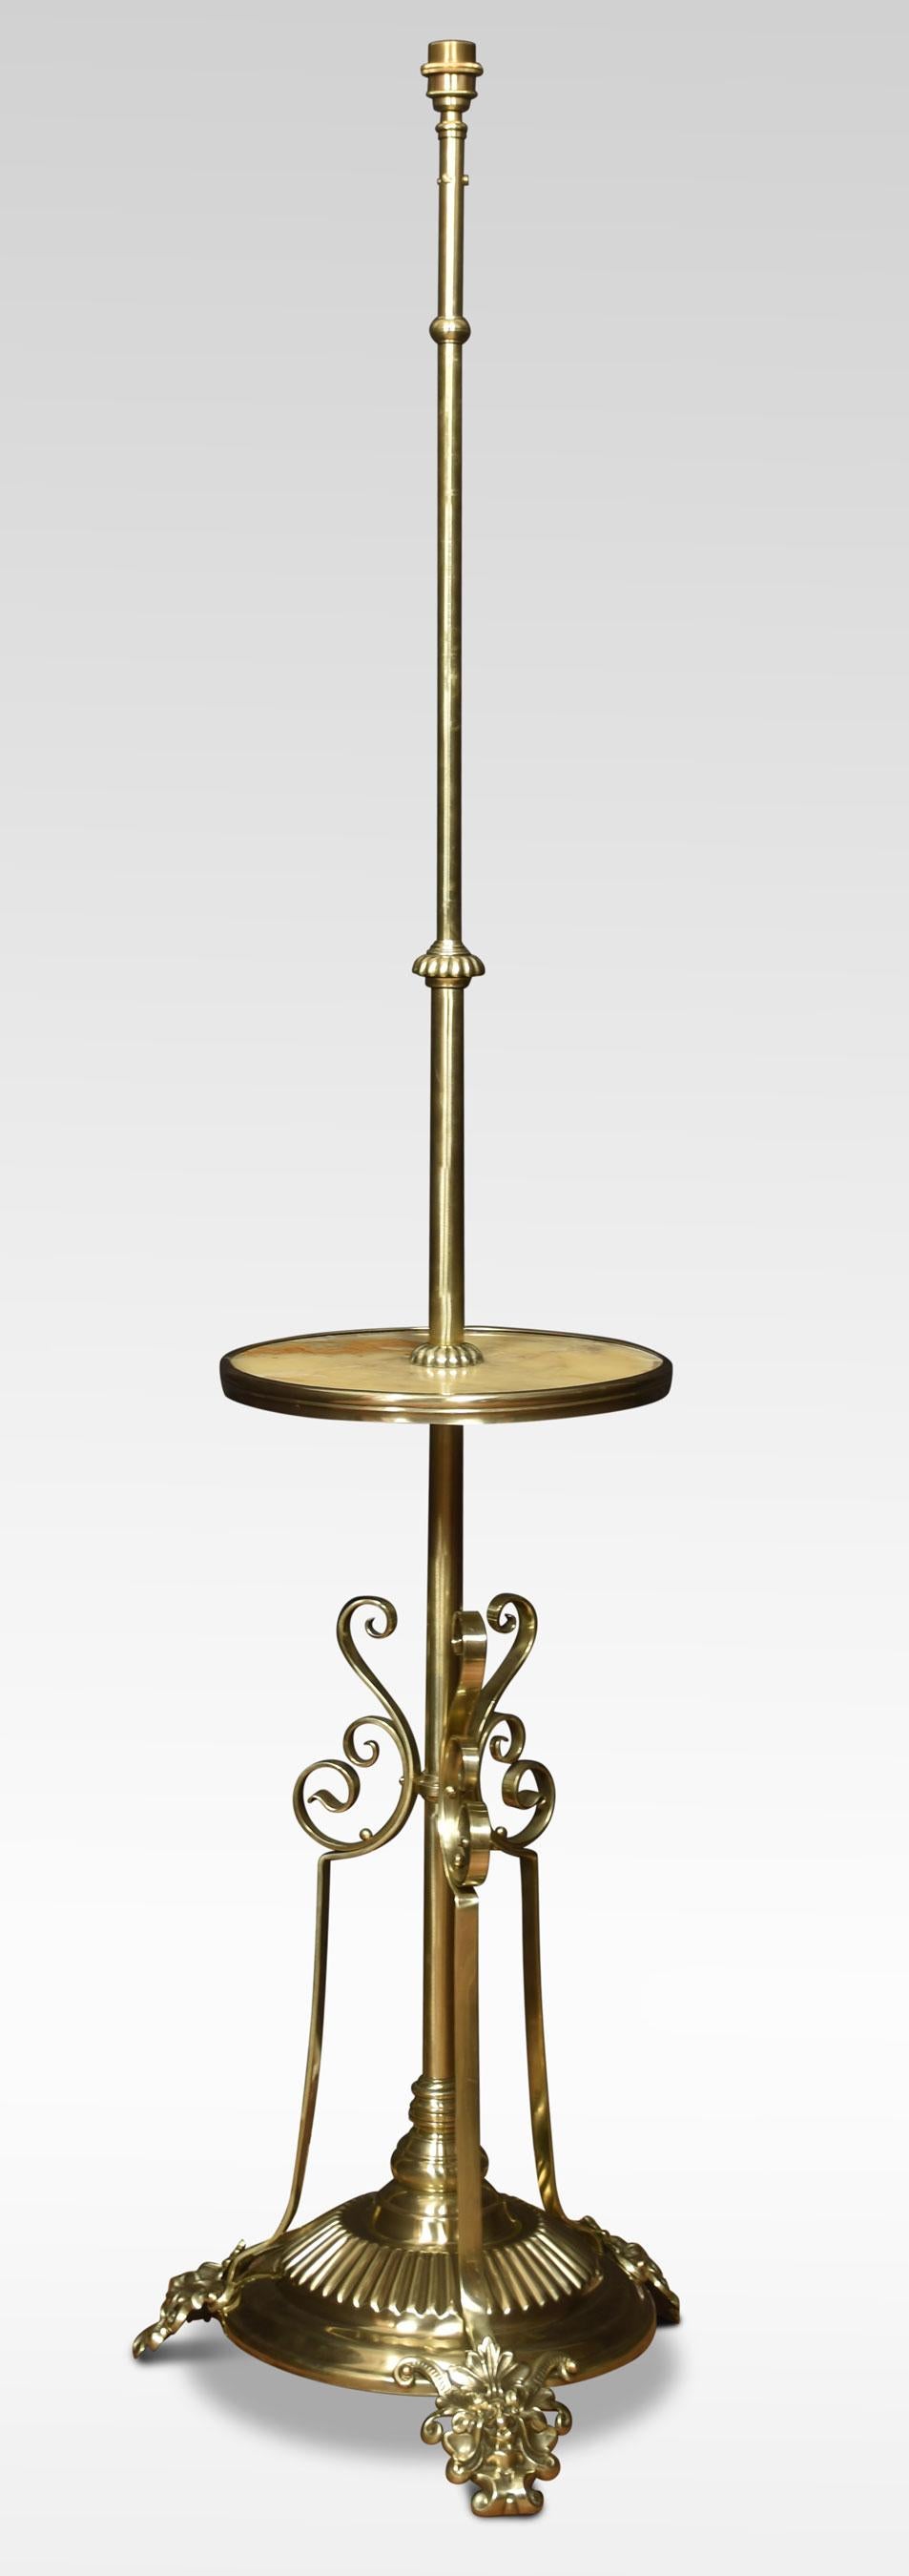 Onyx and Brass Adjustable Standard Lamp In Good Condition For Sale In Cheshire, GB